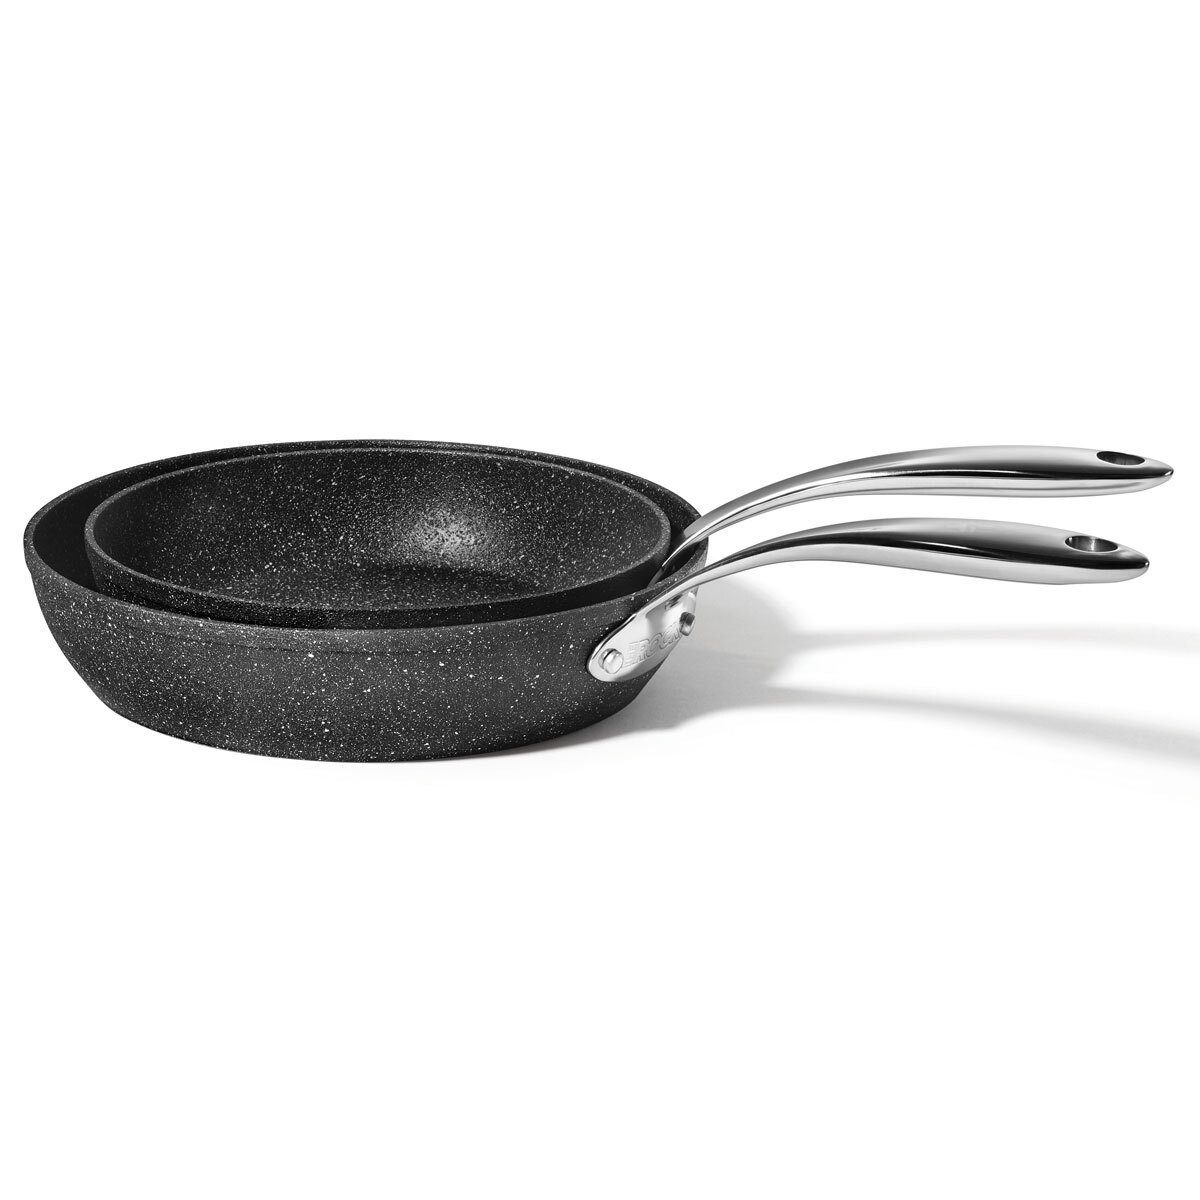 Images of pans